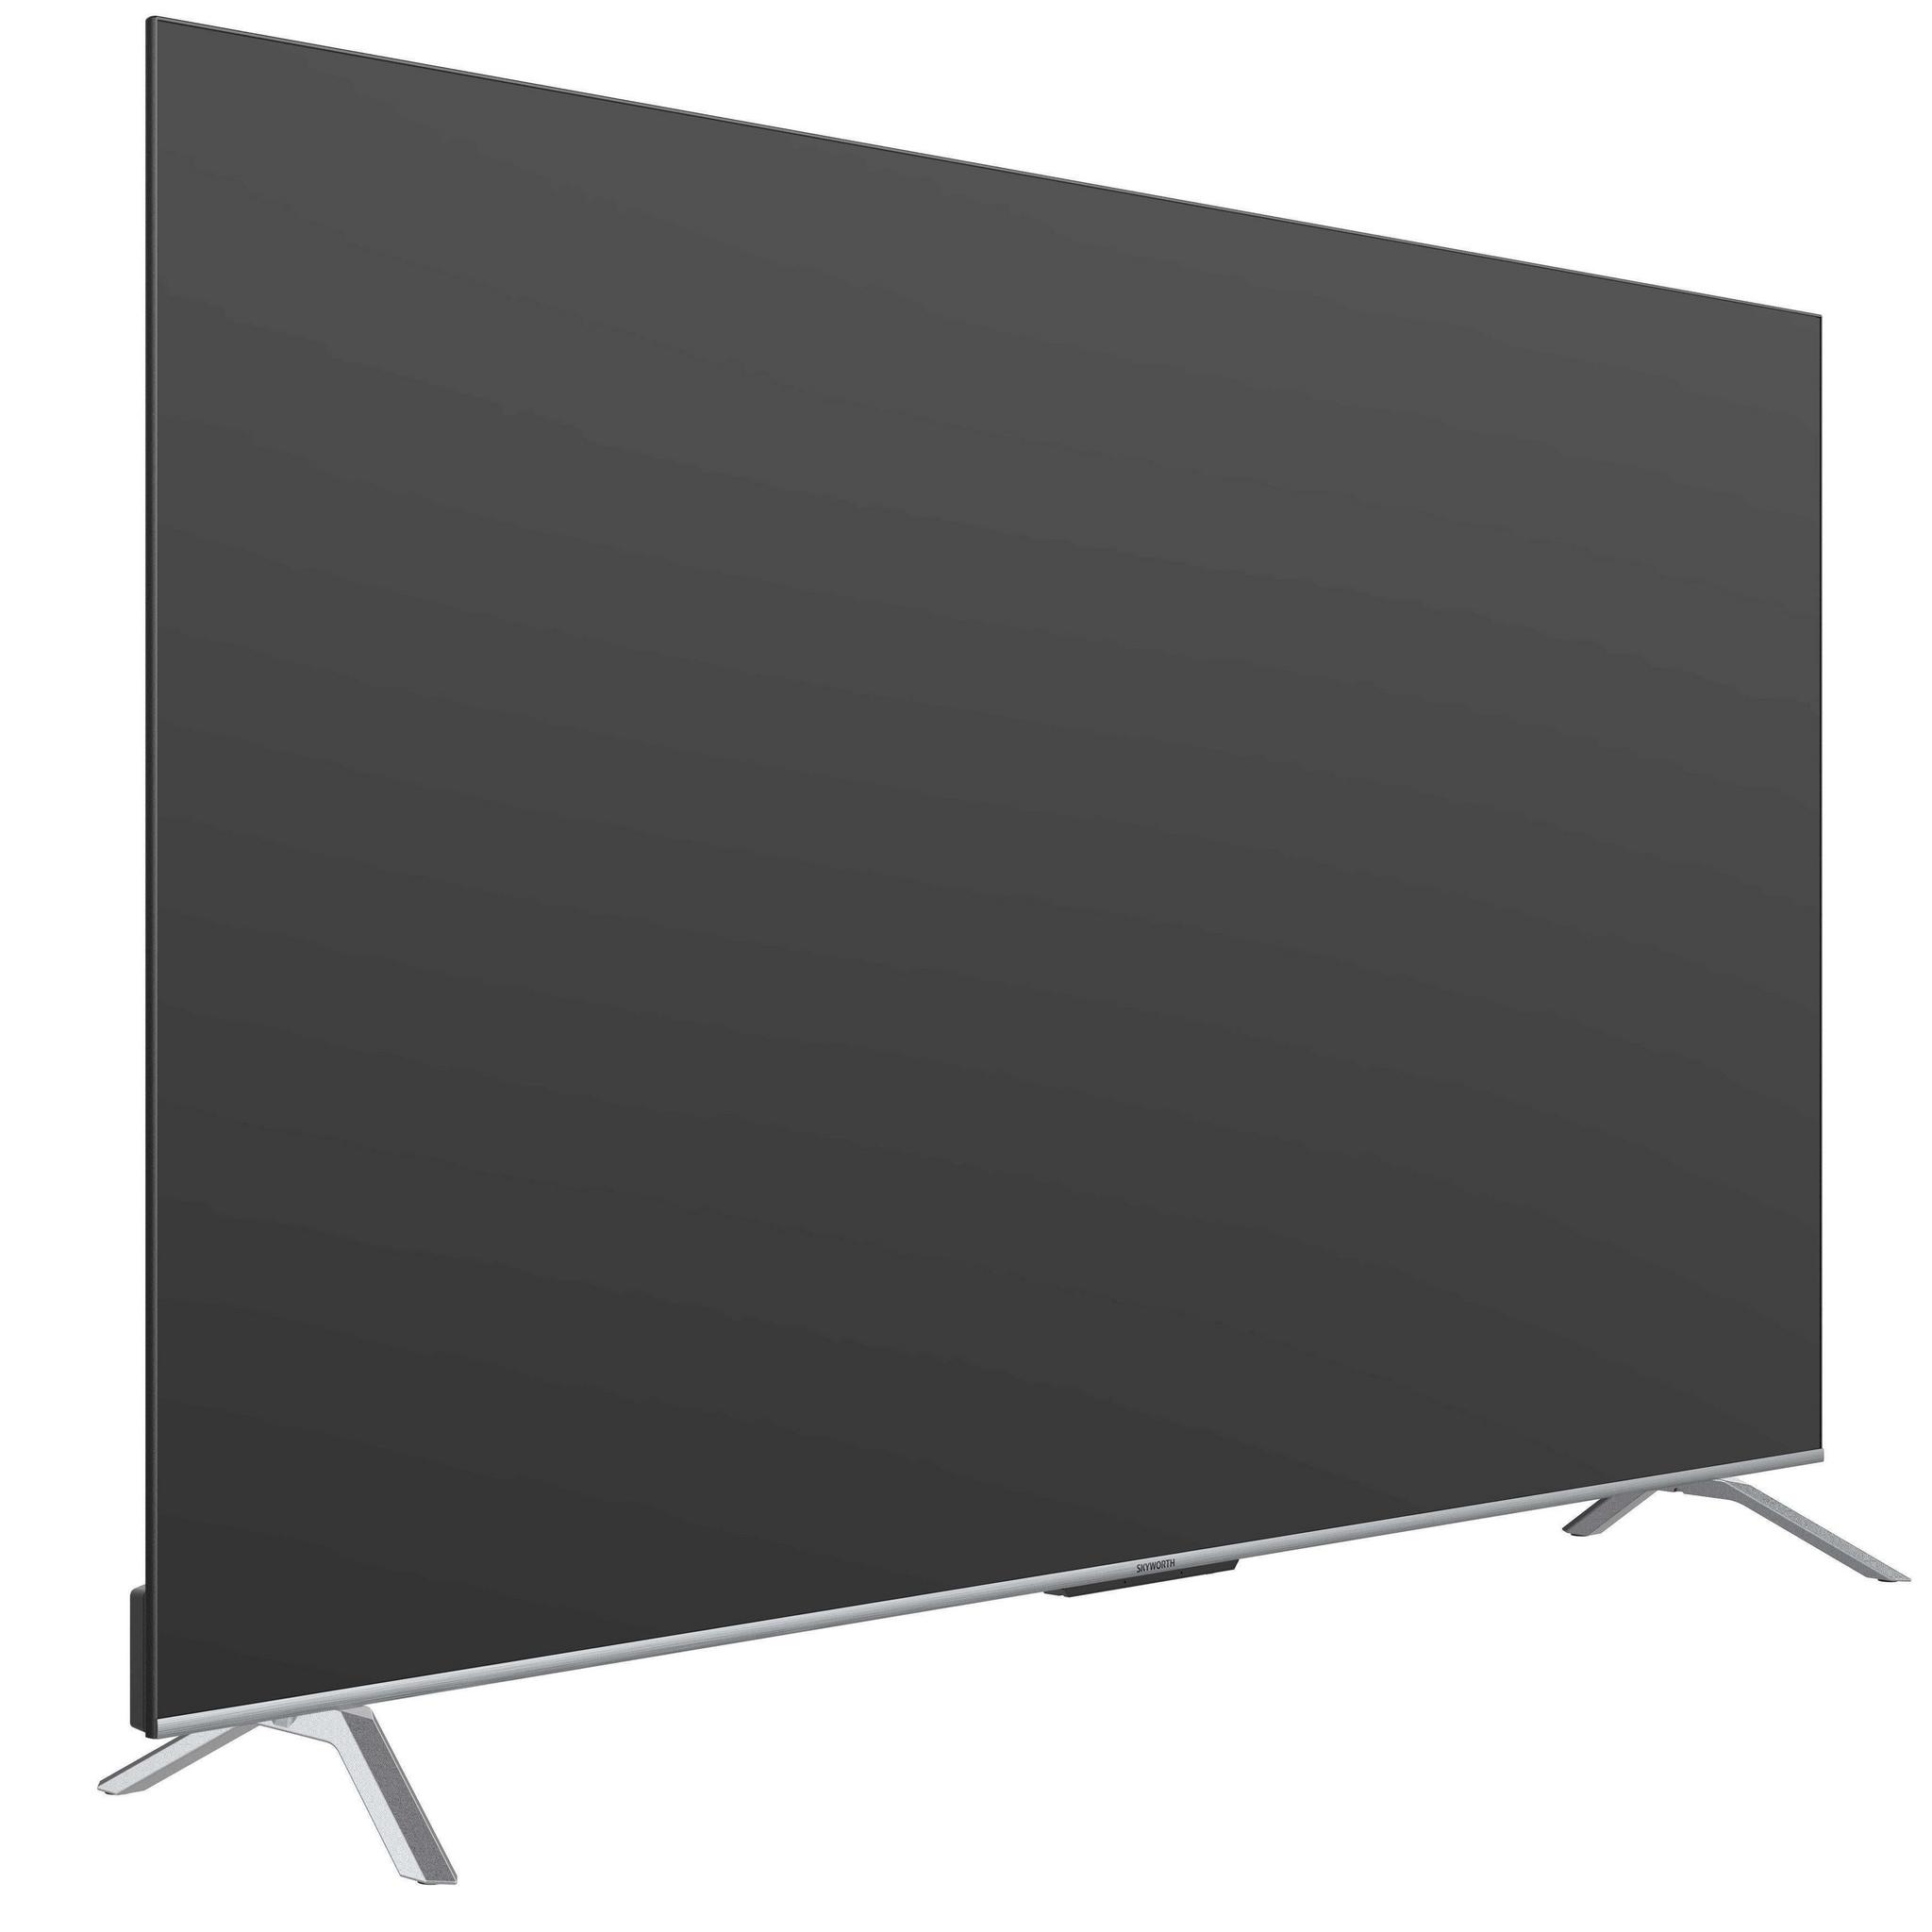 Skyworth 86-inch Android 4K LED TV (86SUC9500)